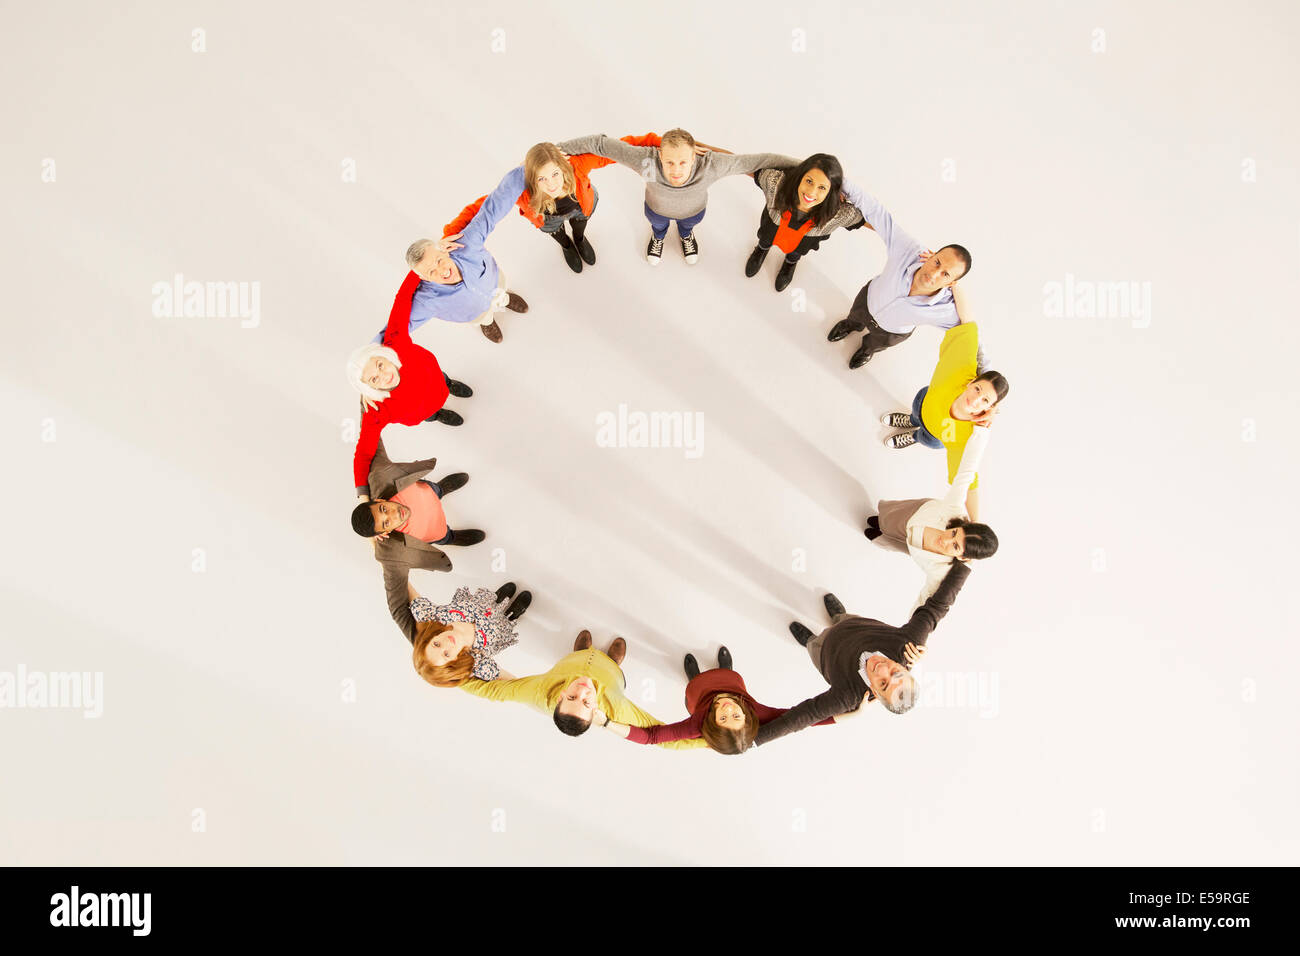 People connected in circle Stock Photo